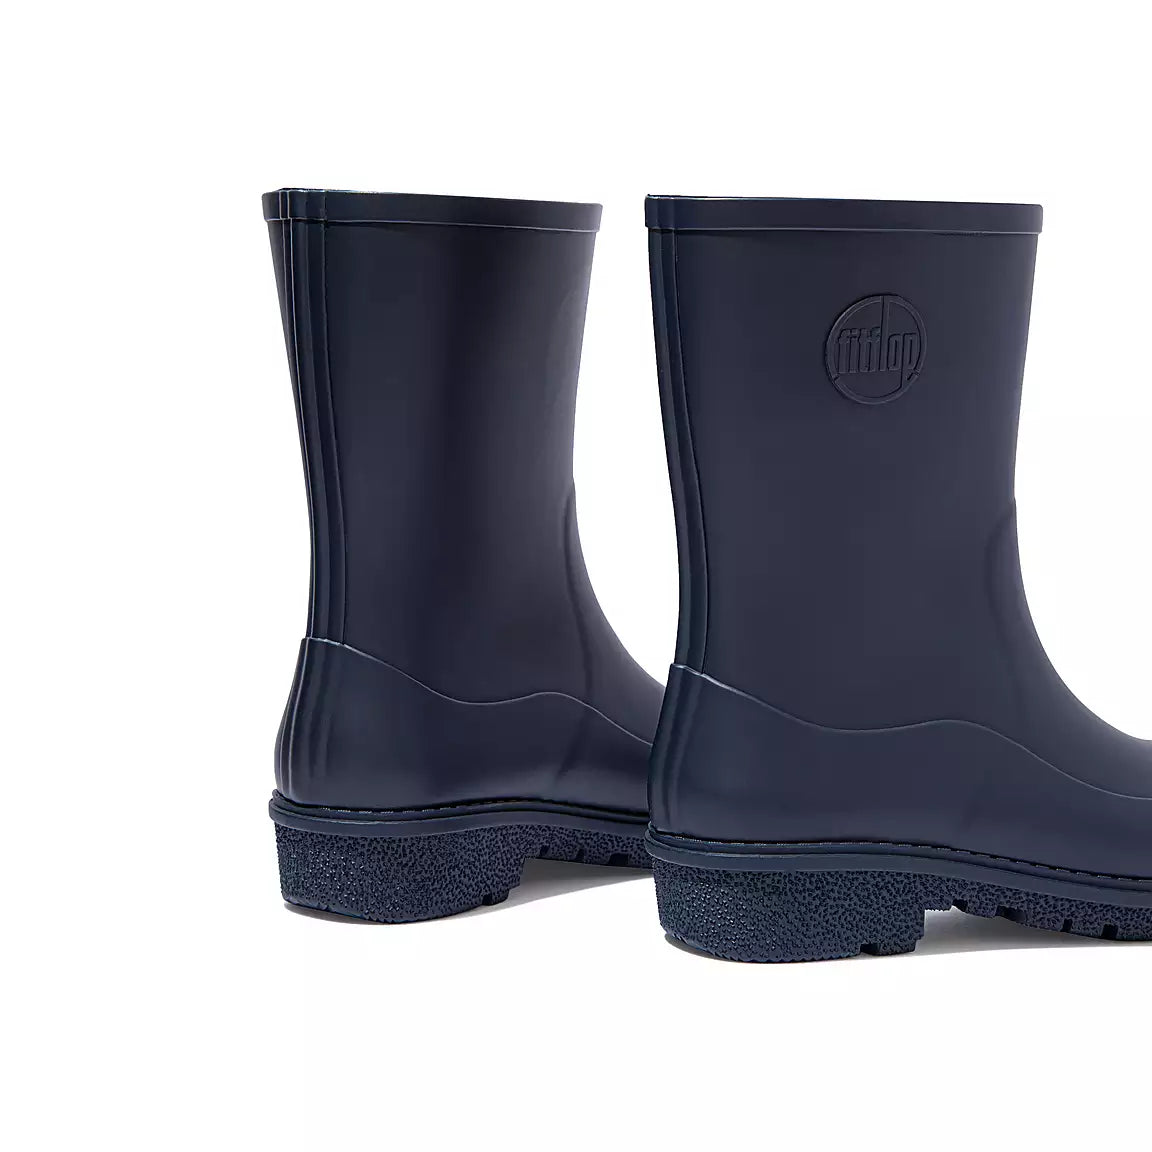 FitFlop FitFlop WONDERWELLY Short Wellington Boots    